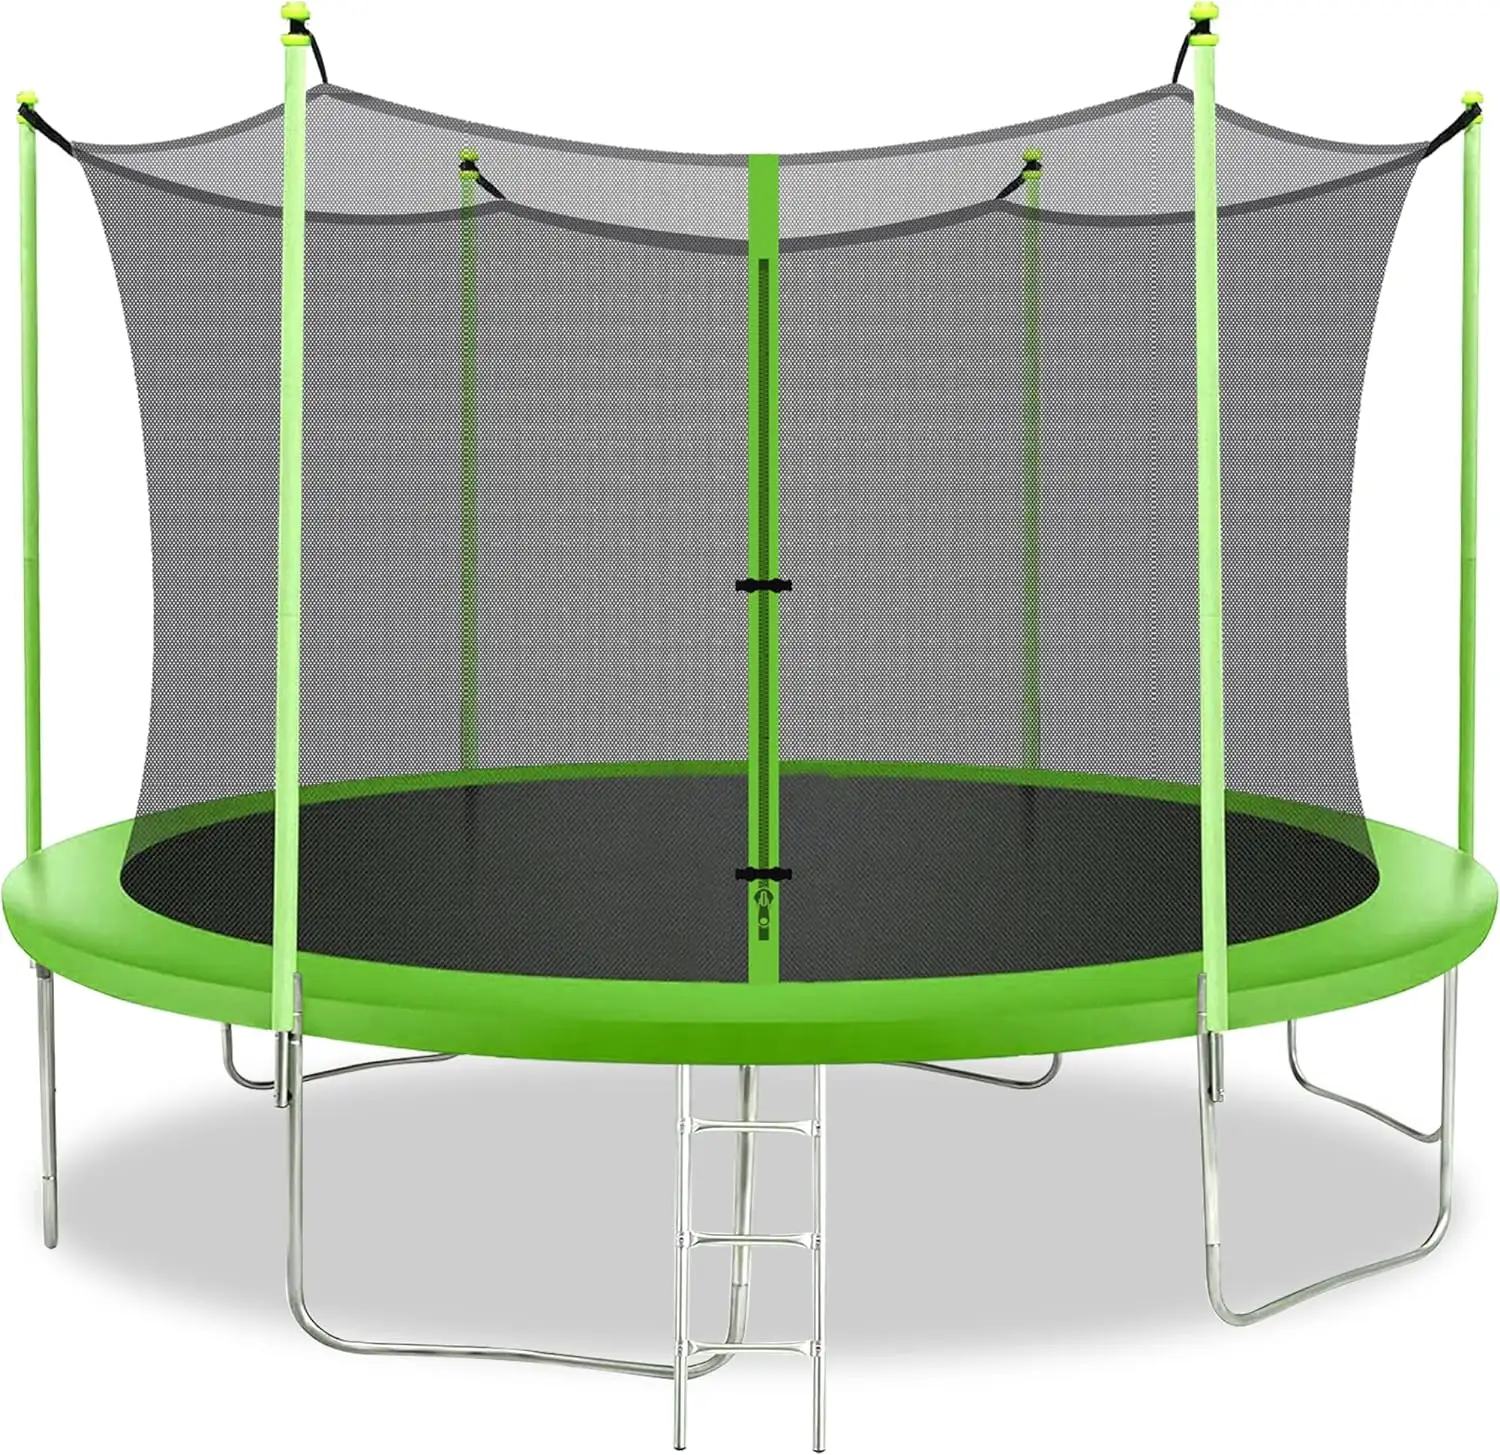 8FT 10FT 12FT 14FT PVC Spring Cover Padding Enclosure Net Protective Outdoor Fitness Exercise Jumping Trampoline